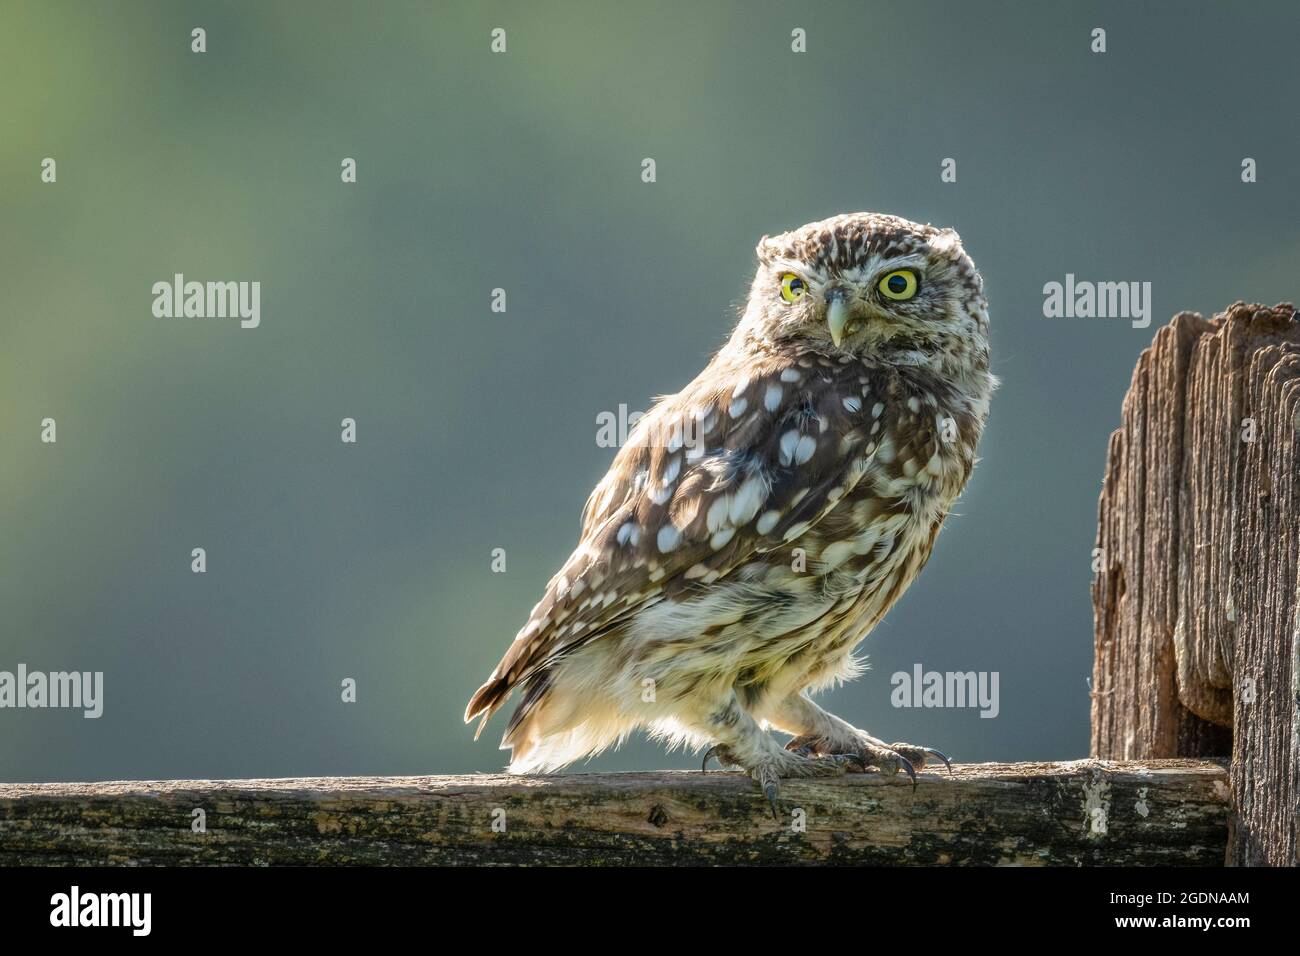 Little Owl Looking at Camera. Stock Photo